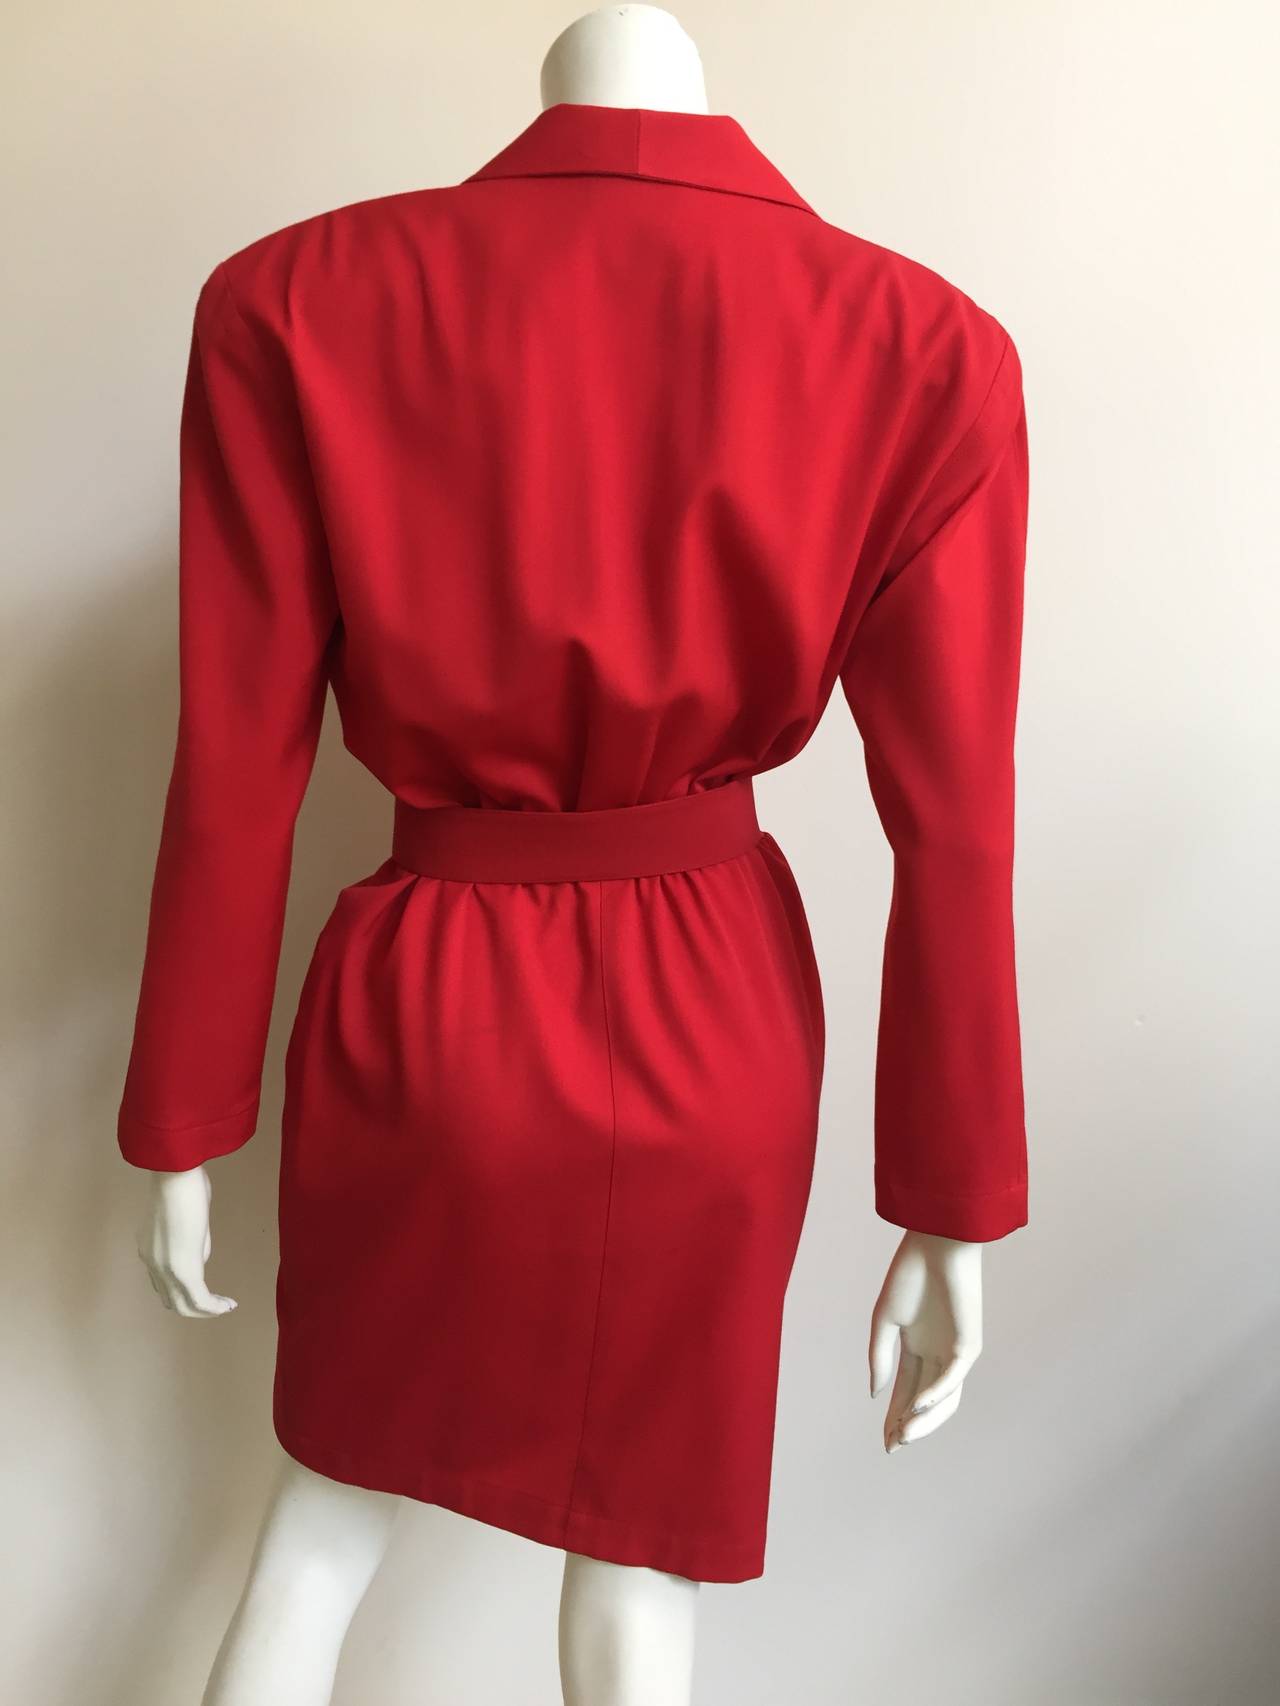 Thierry Mugler 80s Dress With Pockets Size 6. at 1stdibs